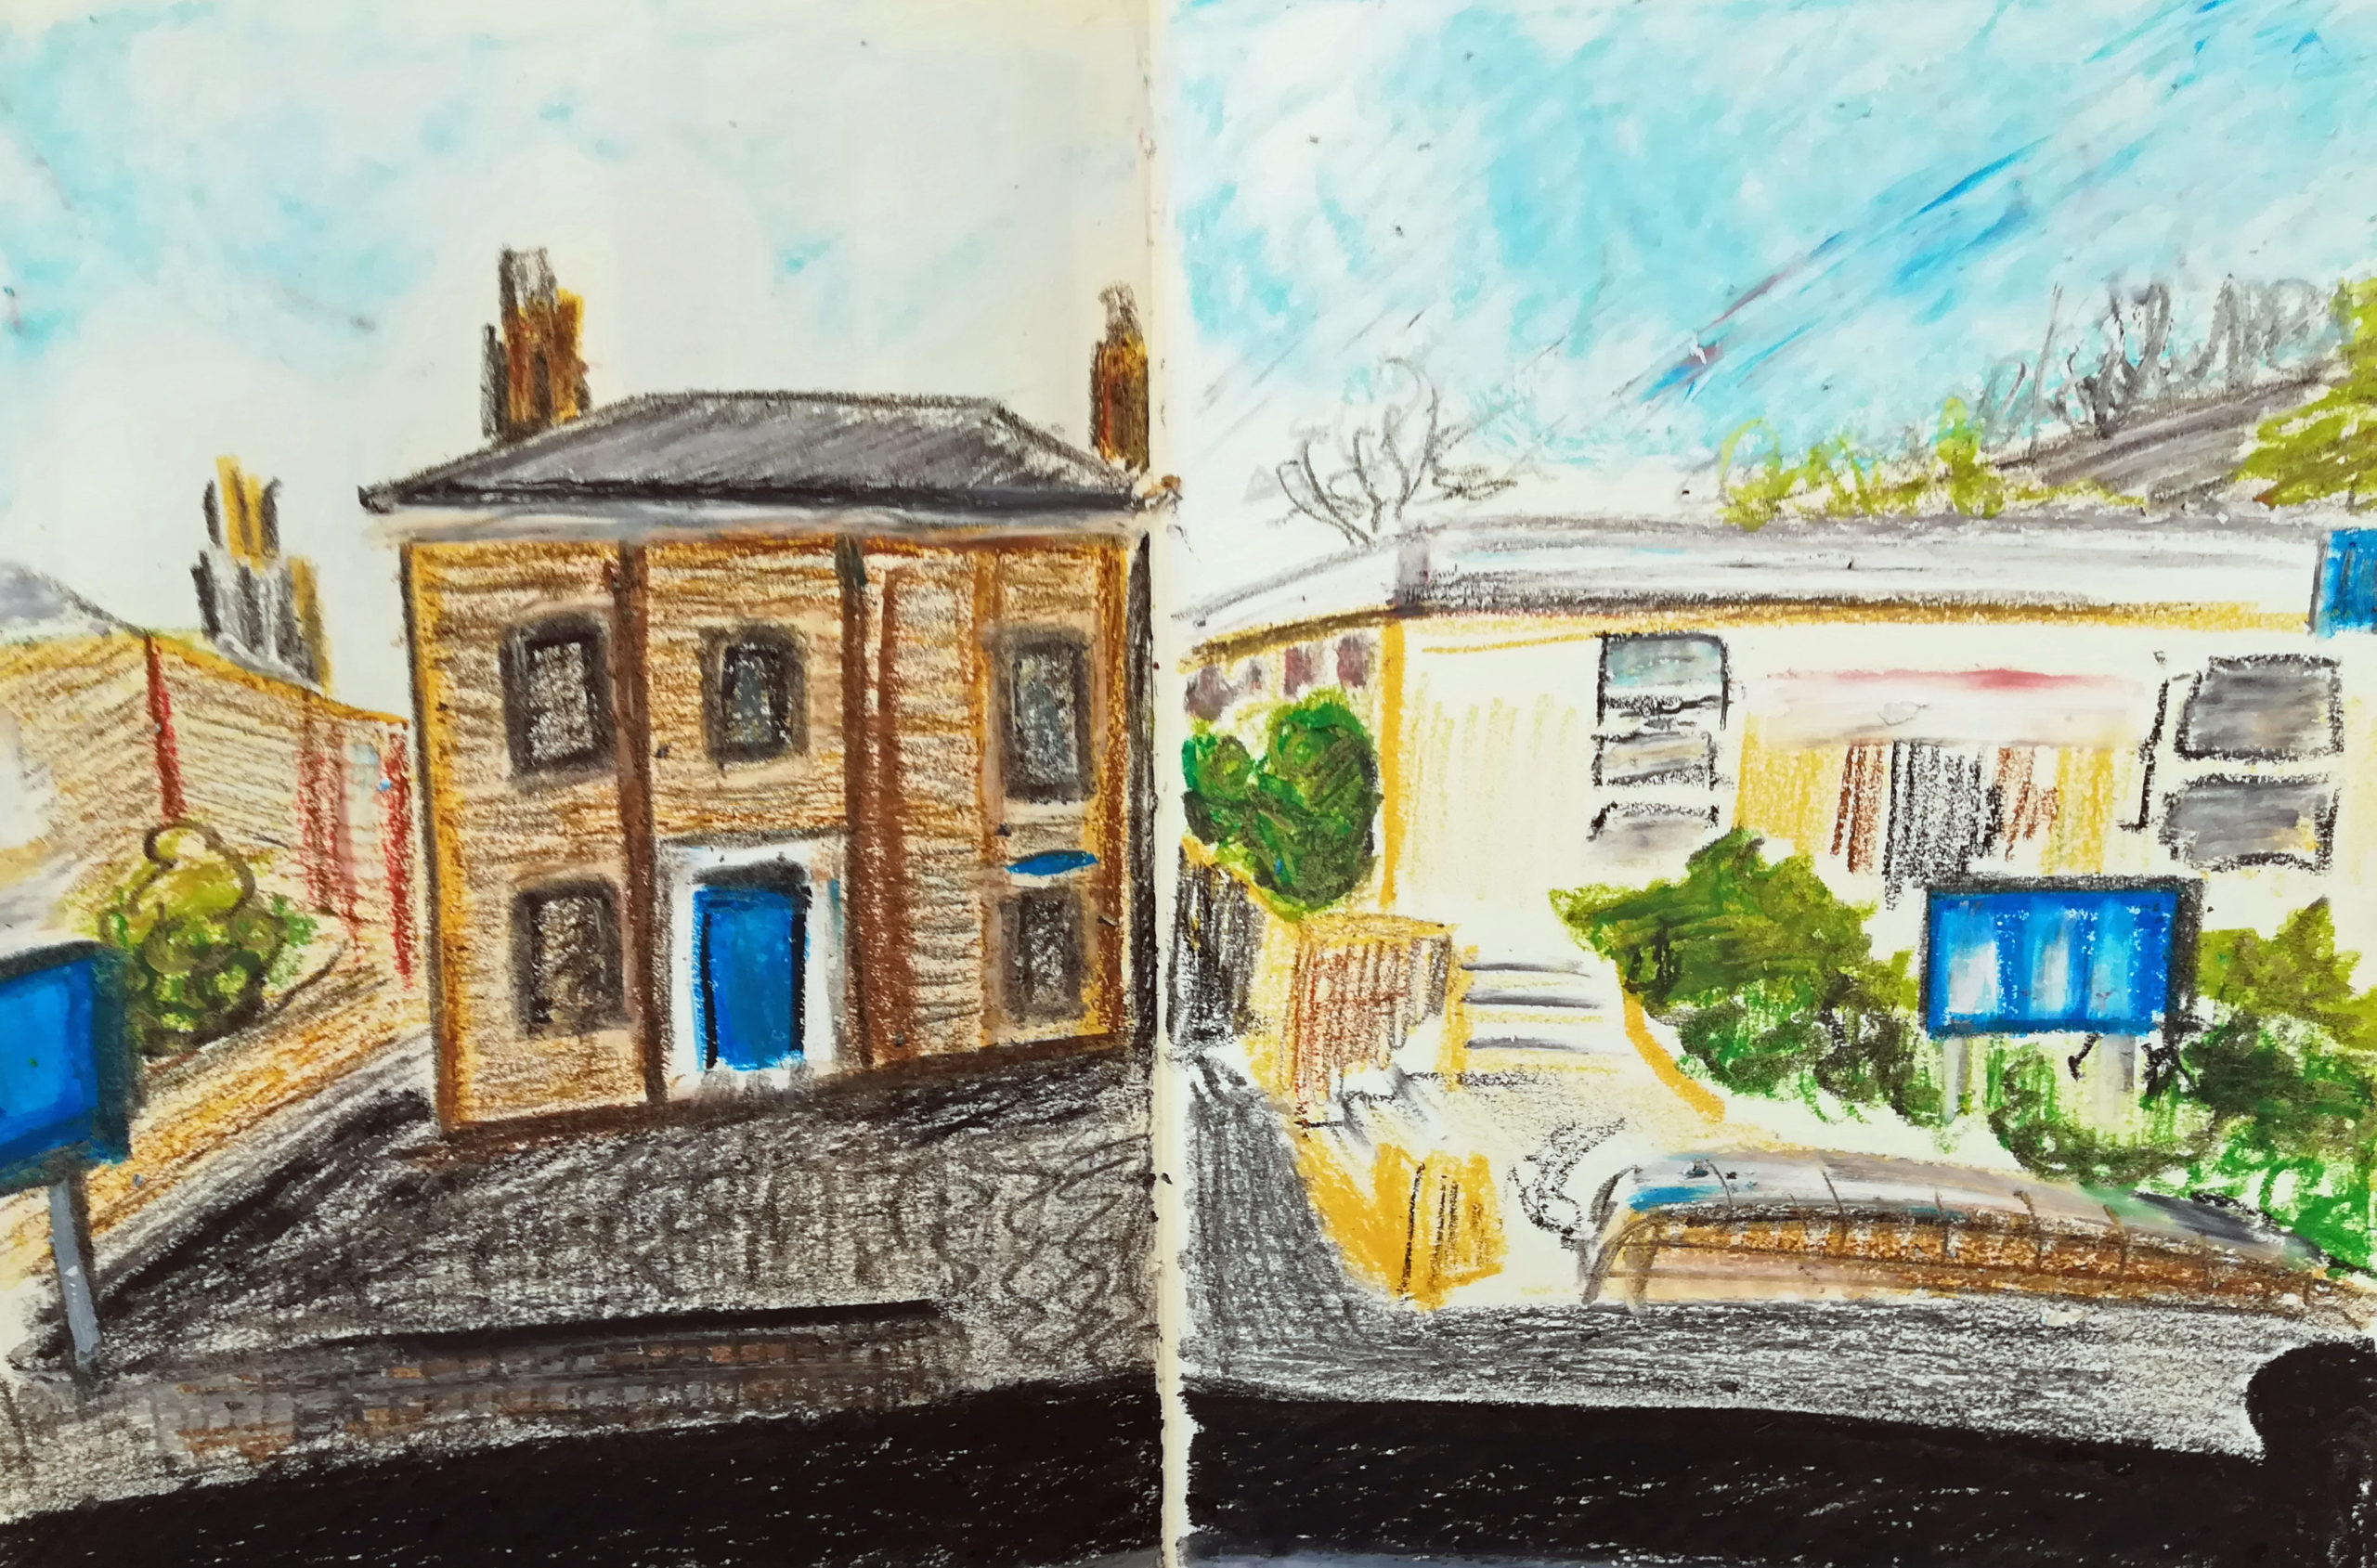 Two hand drawn images of a building side by side, one drawing shows a large two-storey building with large windows, three on the top floor and two on the bottom in each corner of the building. There is a blue front door and slanted roof with two chimneys, one on either end of the roof. There is a sign coloured in blue on the front drive. The other image of a building shows a single story building with a flat roof and roughly drawn in windows and a small number of steps up the the building, this image also features a sign coloured in, in blue.